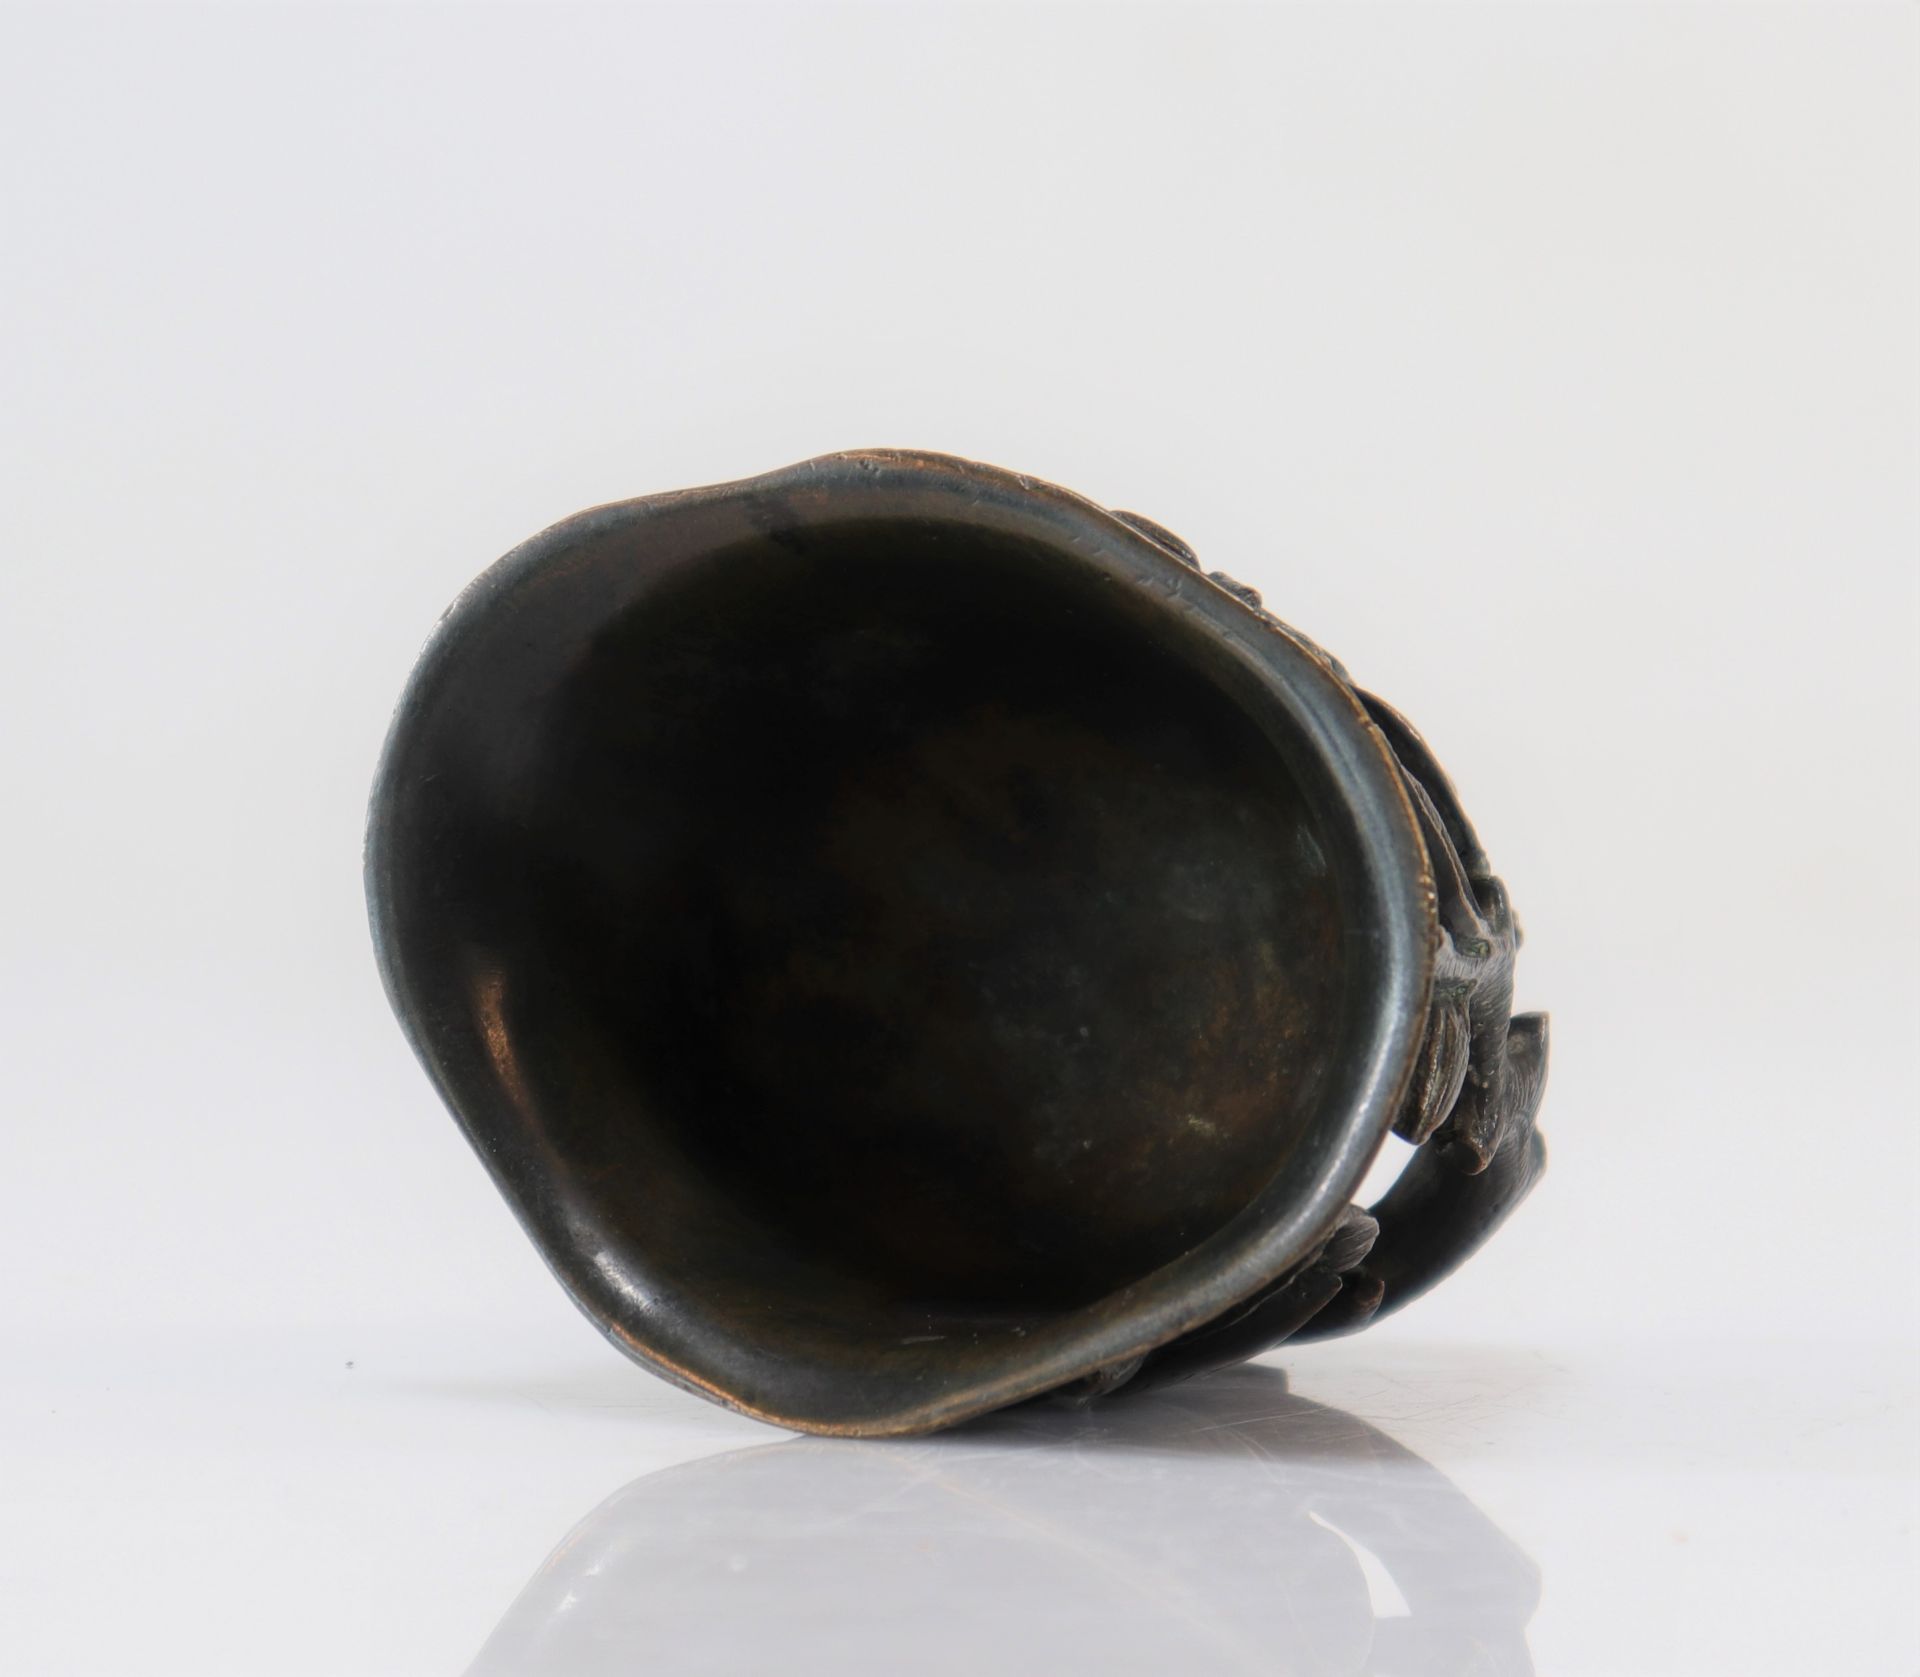 Chinese libation cup in 18th century bronze or earlier - Image 6 of 6